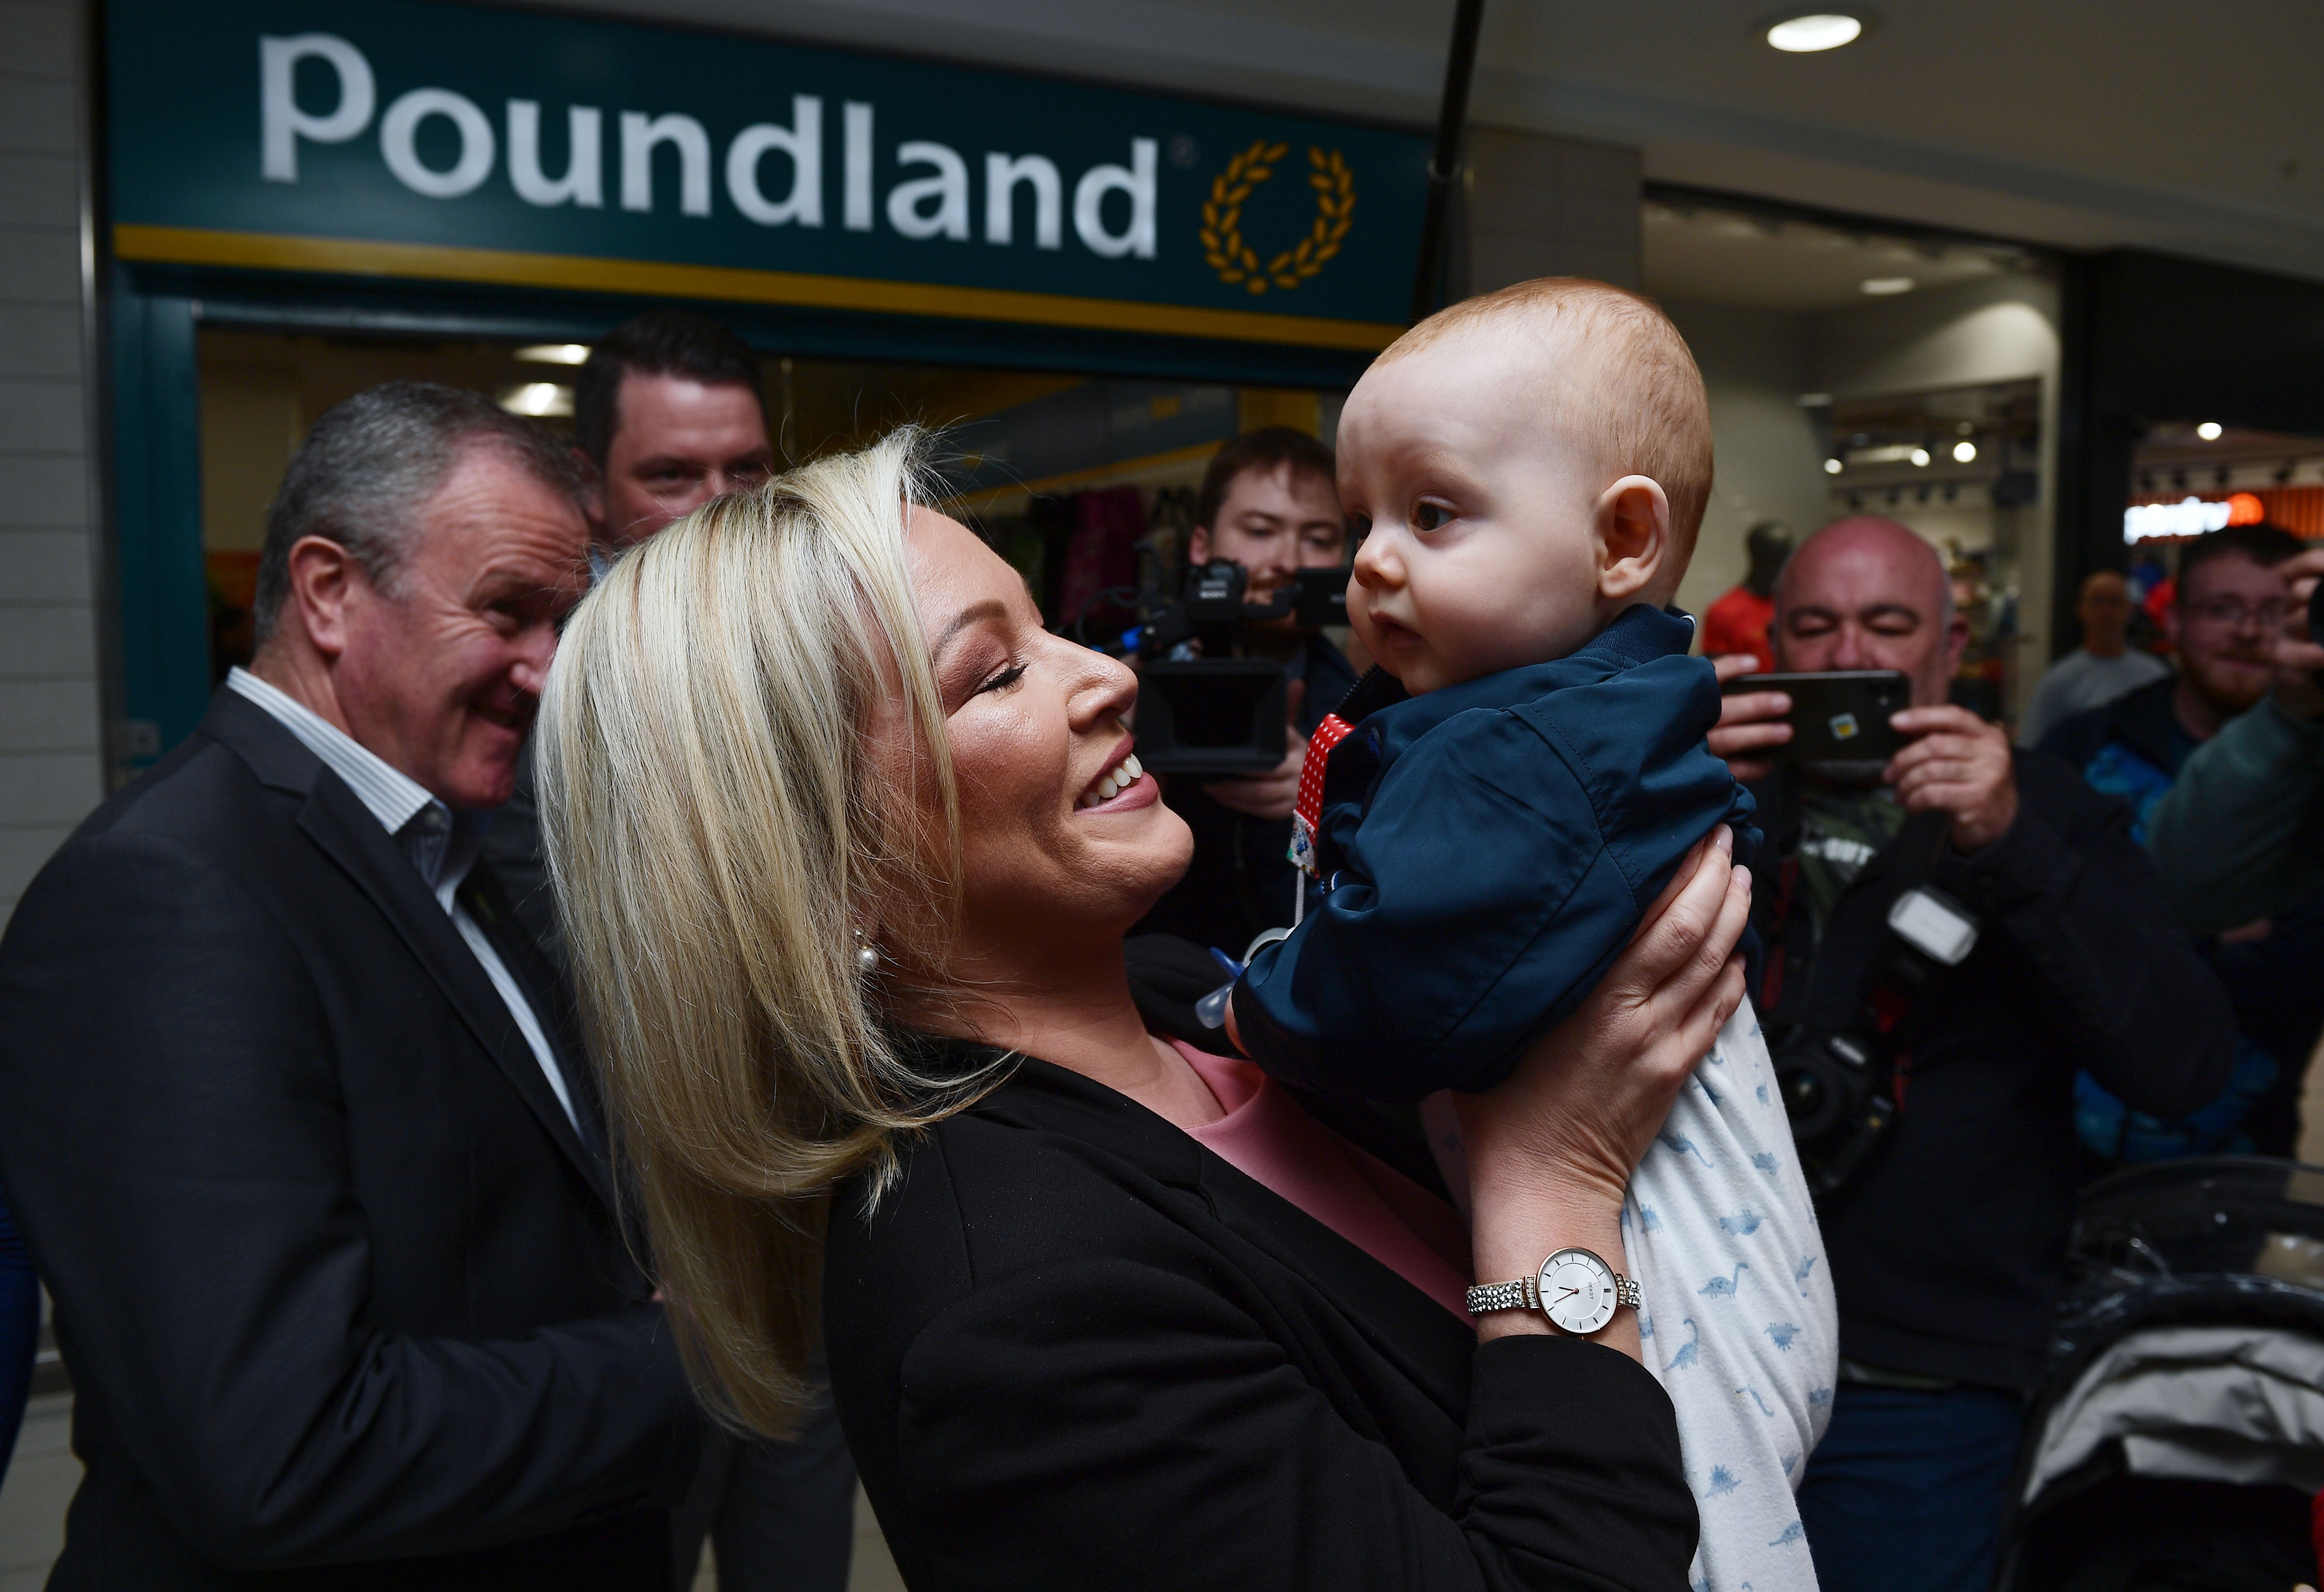 Sinn Fein’s Michelle O’Neill meets voters at Kennedy shopping centre in Belfast on Tuesday